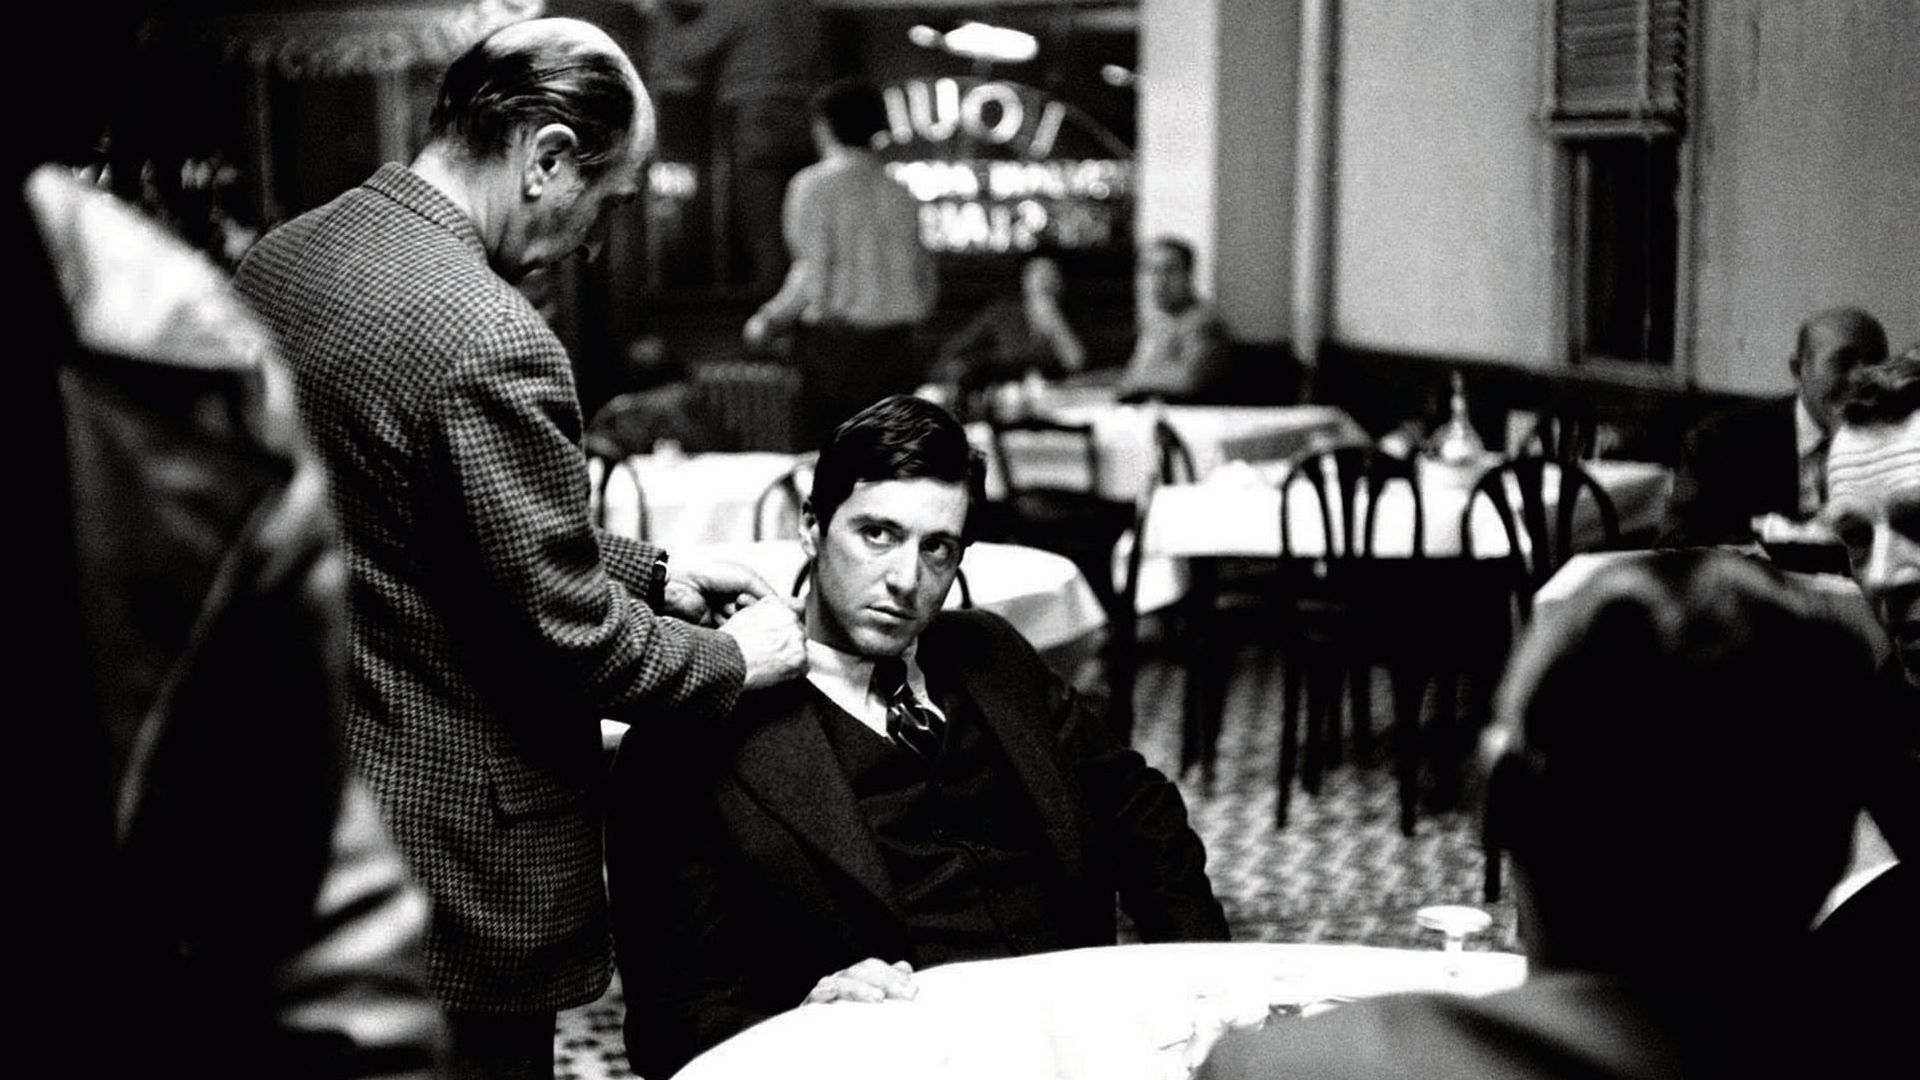 Al Pacino on the set of “The Godfather”